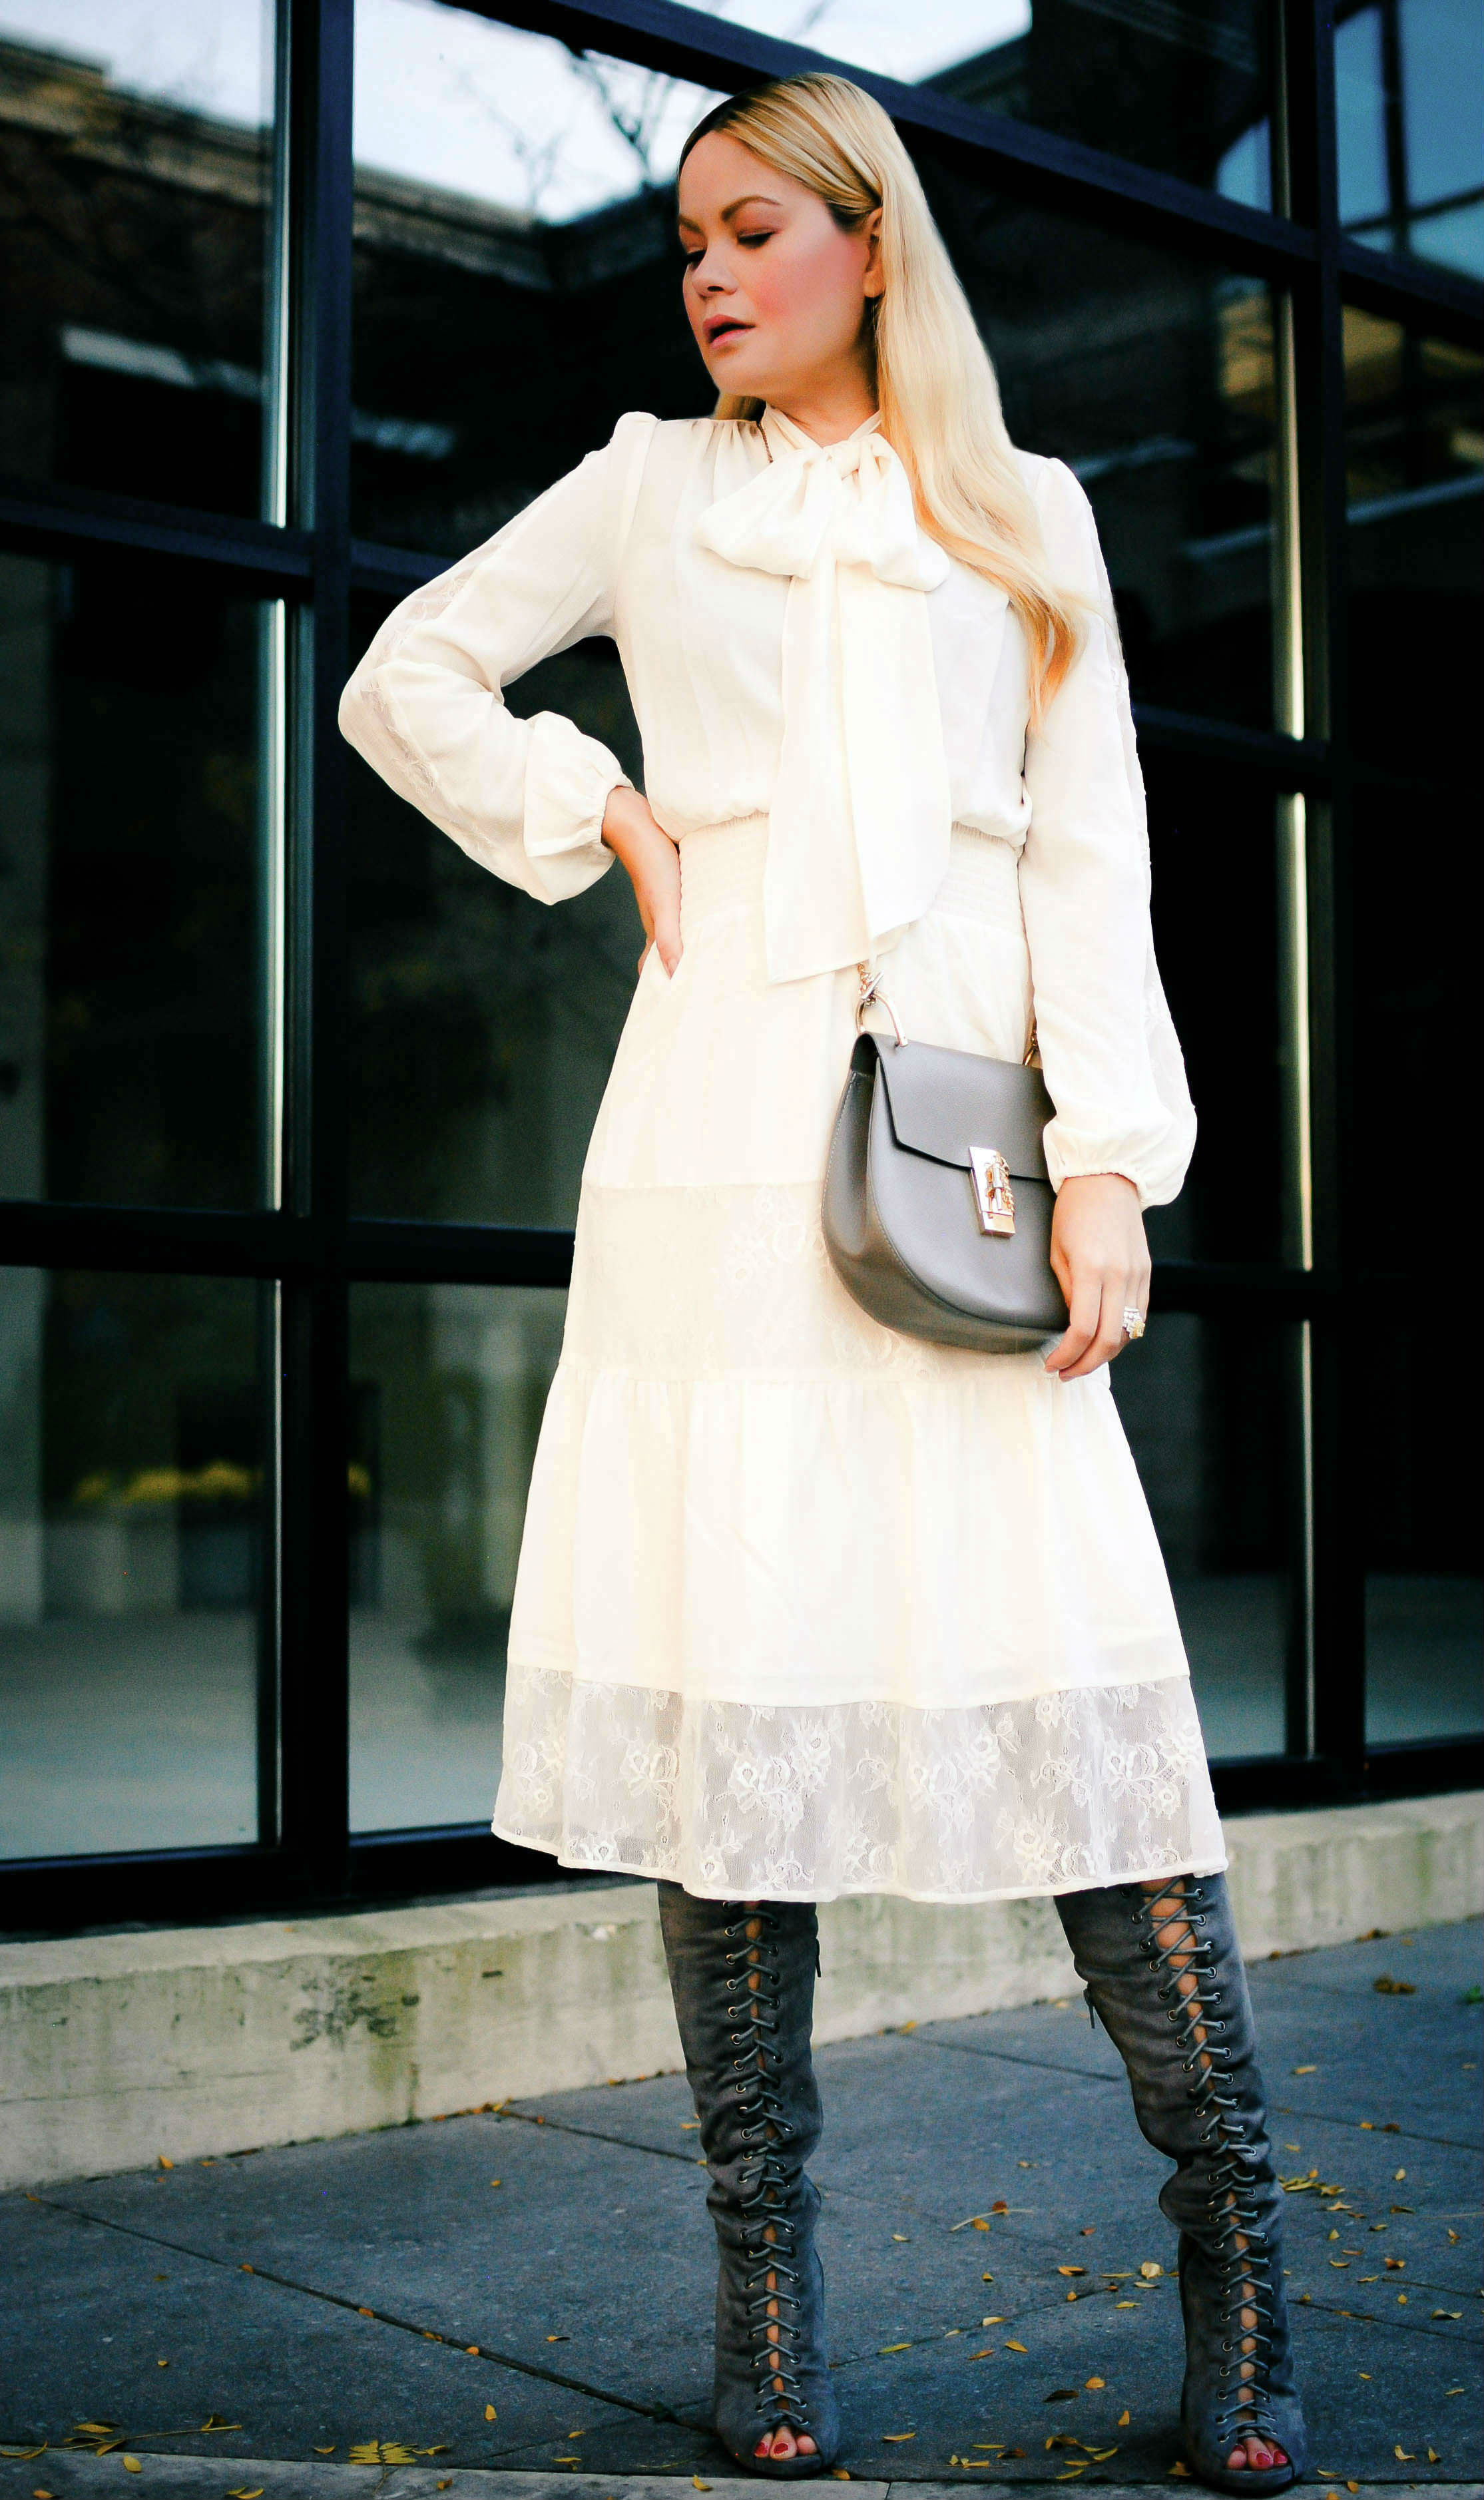 vanessa-lambert-blogger-behind-what-would-v-wears-a-white-dress-from-eva-mendes-fall-collection-for-new-york-and-company_8-2